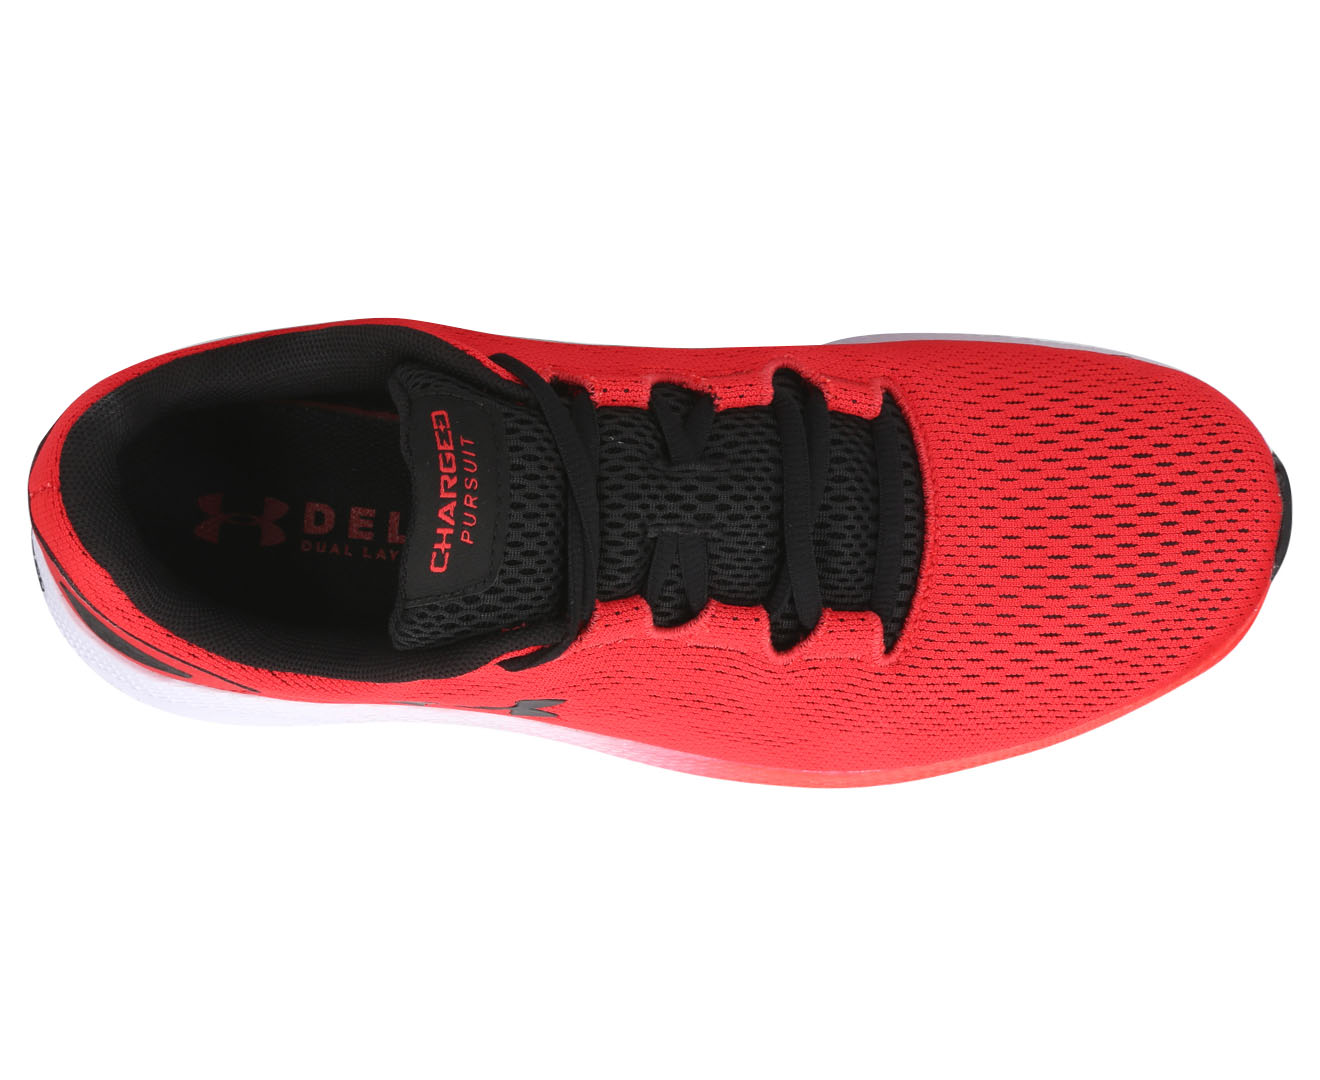 Under Armour Men's UA Charged Pursuit 2 Running Shoes - Red/White/Black ...